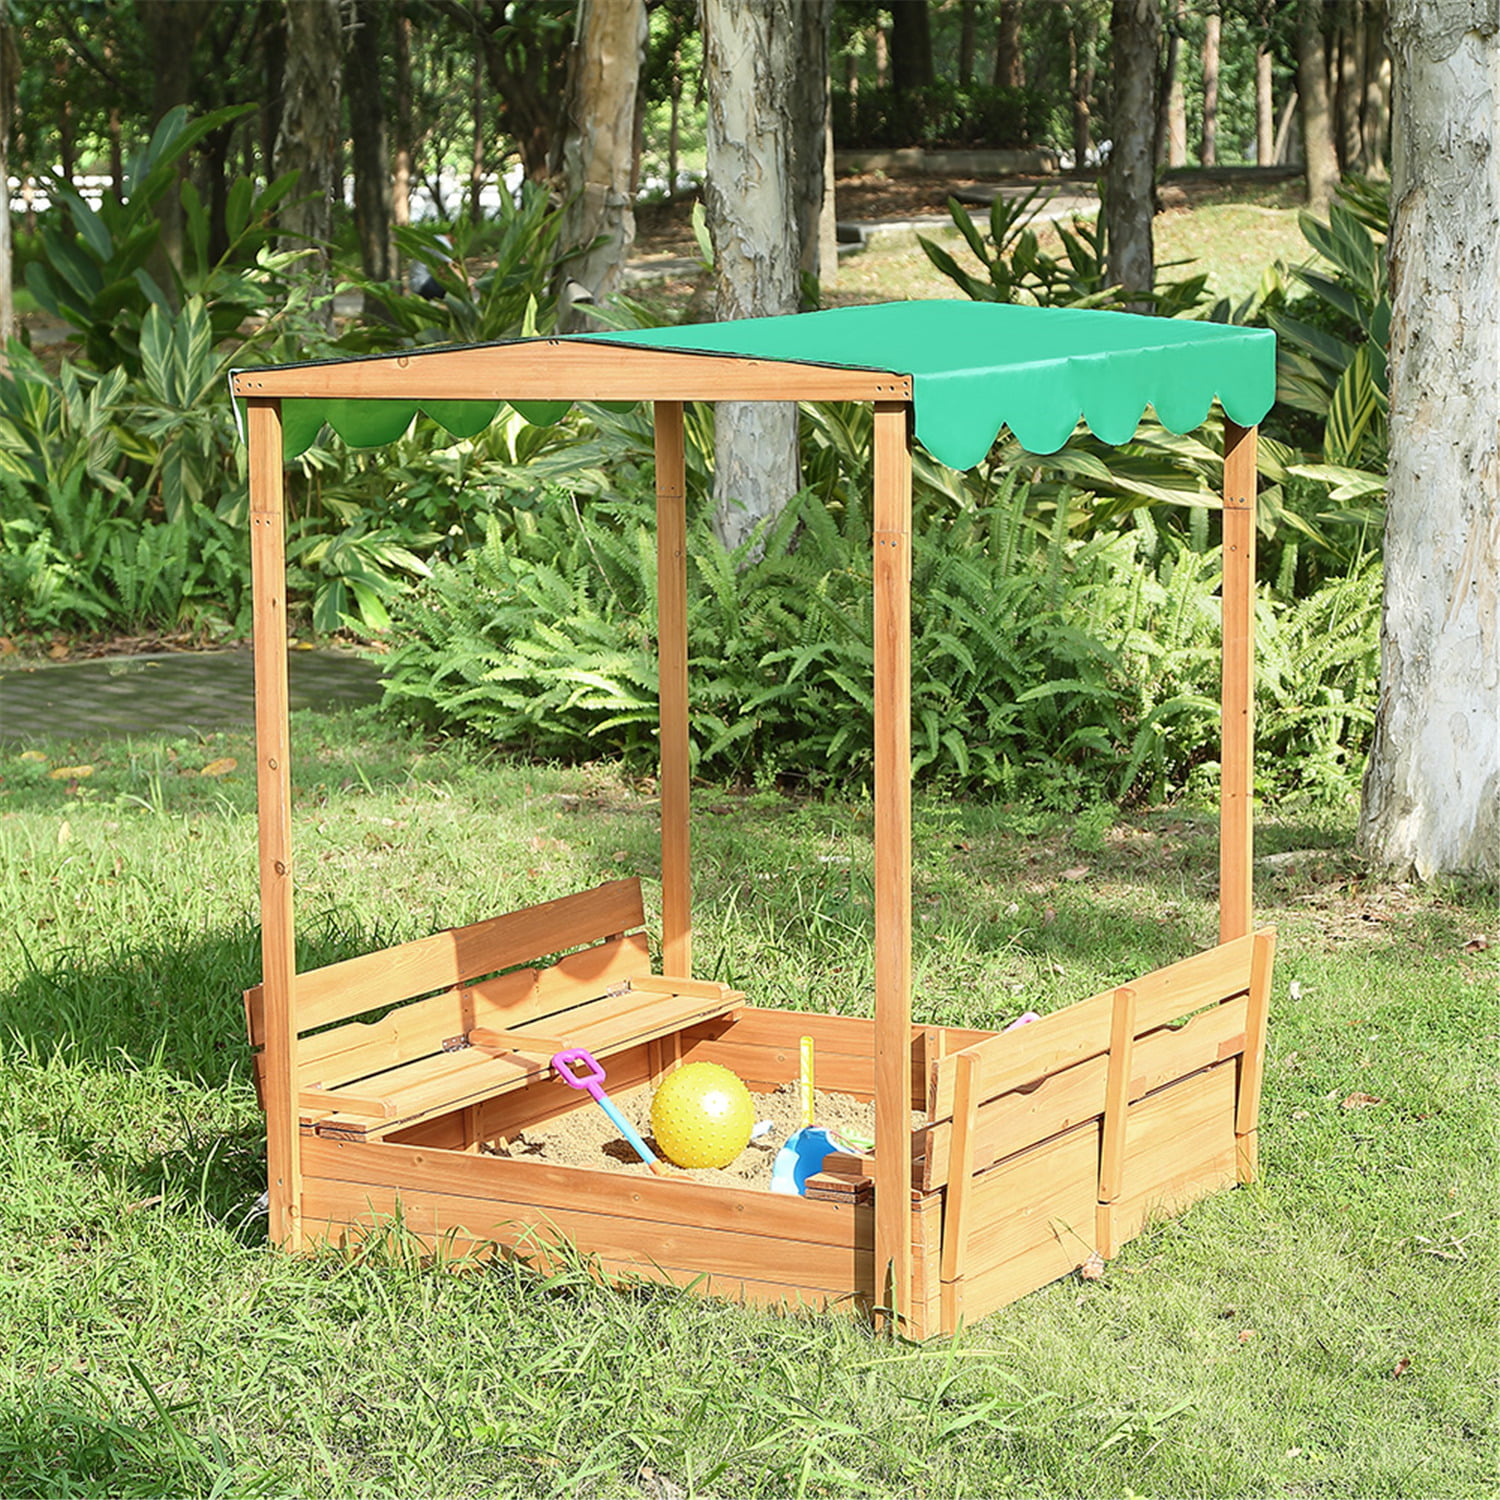 Round Wooden Sandbox with Cover 4 Seats Solid Weatherproof Cedar Wood Stained 